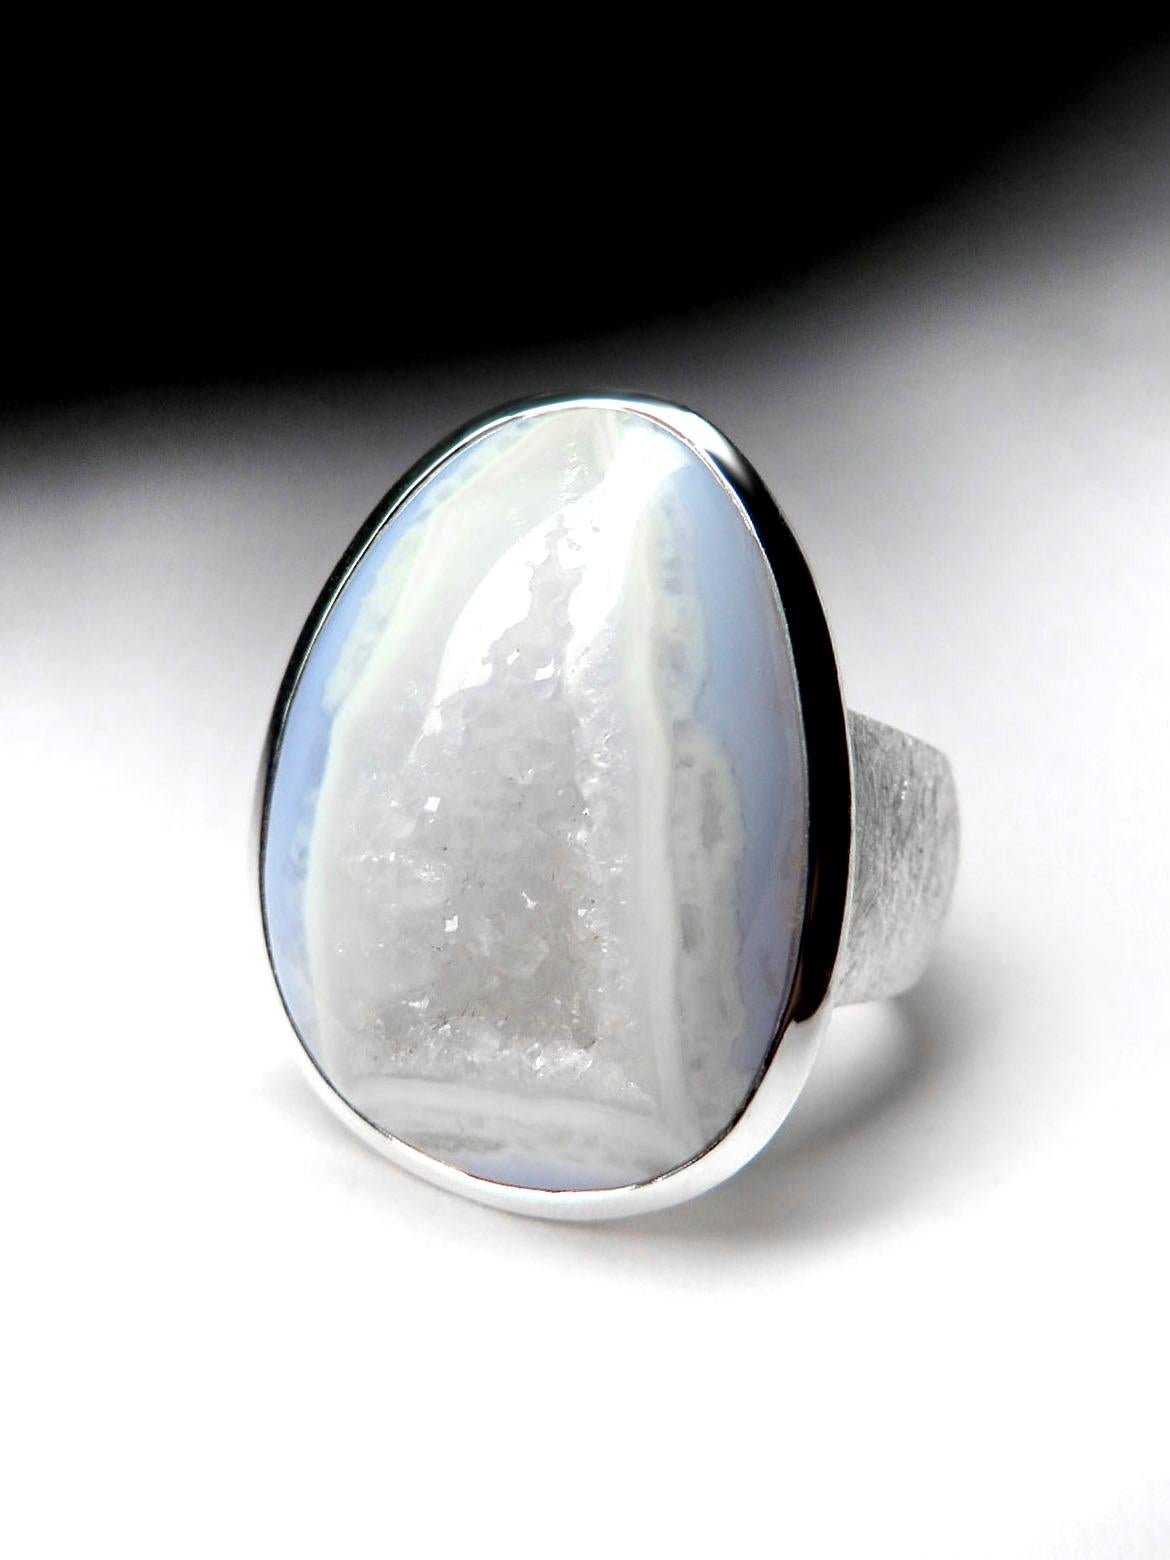 Large scratched sterling silver ring with natural Blue Lace Agate 
Agate origin - Africa
blue lace agate measure - 0.28 х 0.71 х 0.98 in / 7 х 18 х 25 mm
blue lace agate weight - 24 carats
ring weight - 19 grams
ring size - 7.75 US